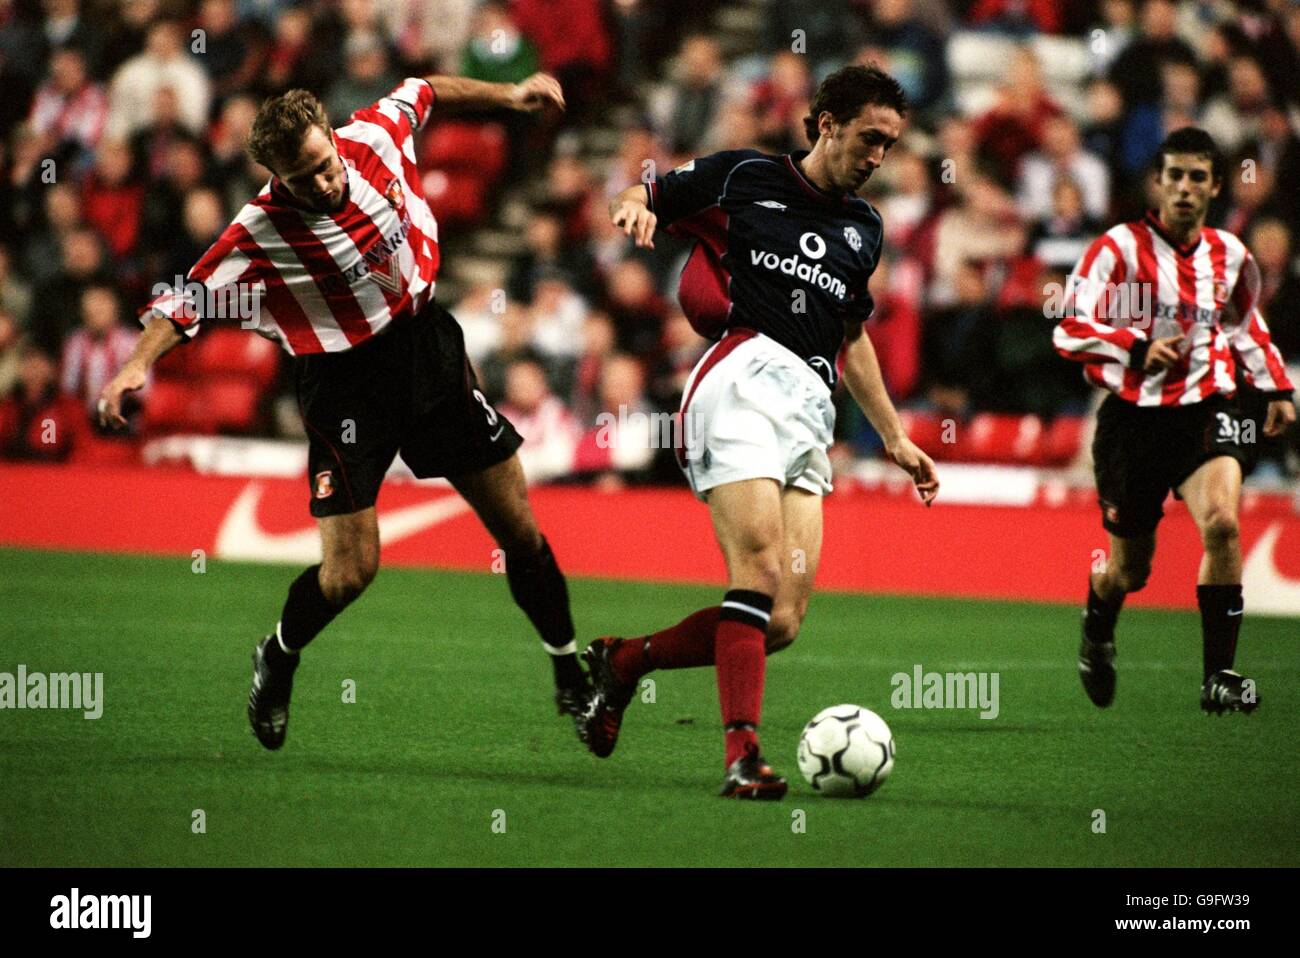 Soccer - Worthington Cup - Fourth Round - Sunderland v Manchester United. Manchester United's Jonathan Greening (r) battles for the ball with Sunderland's Michael Gray (l) Stock Photo